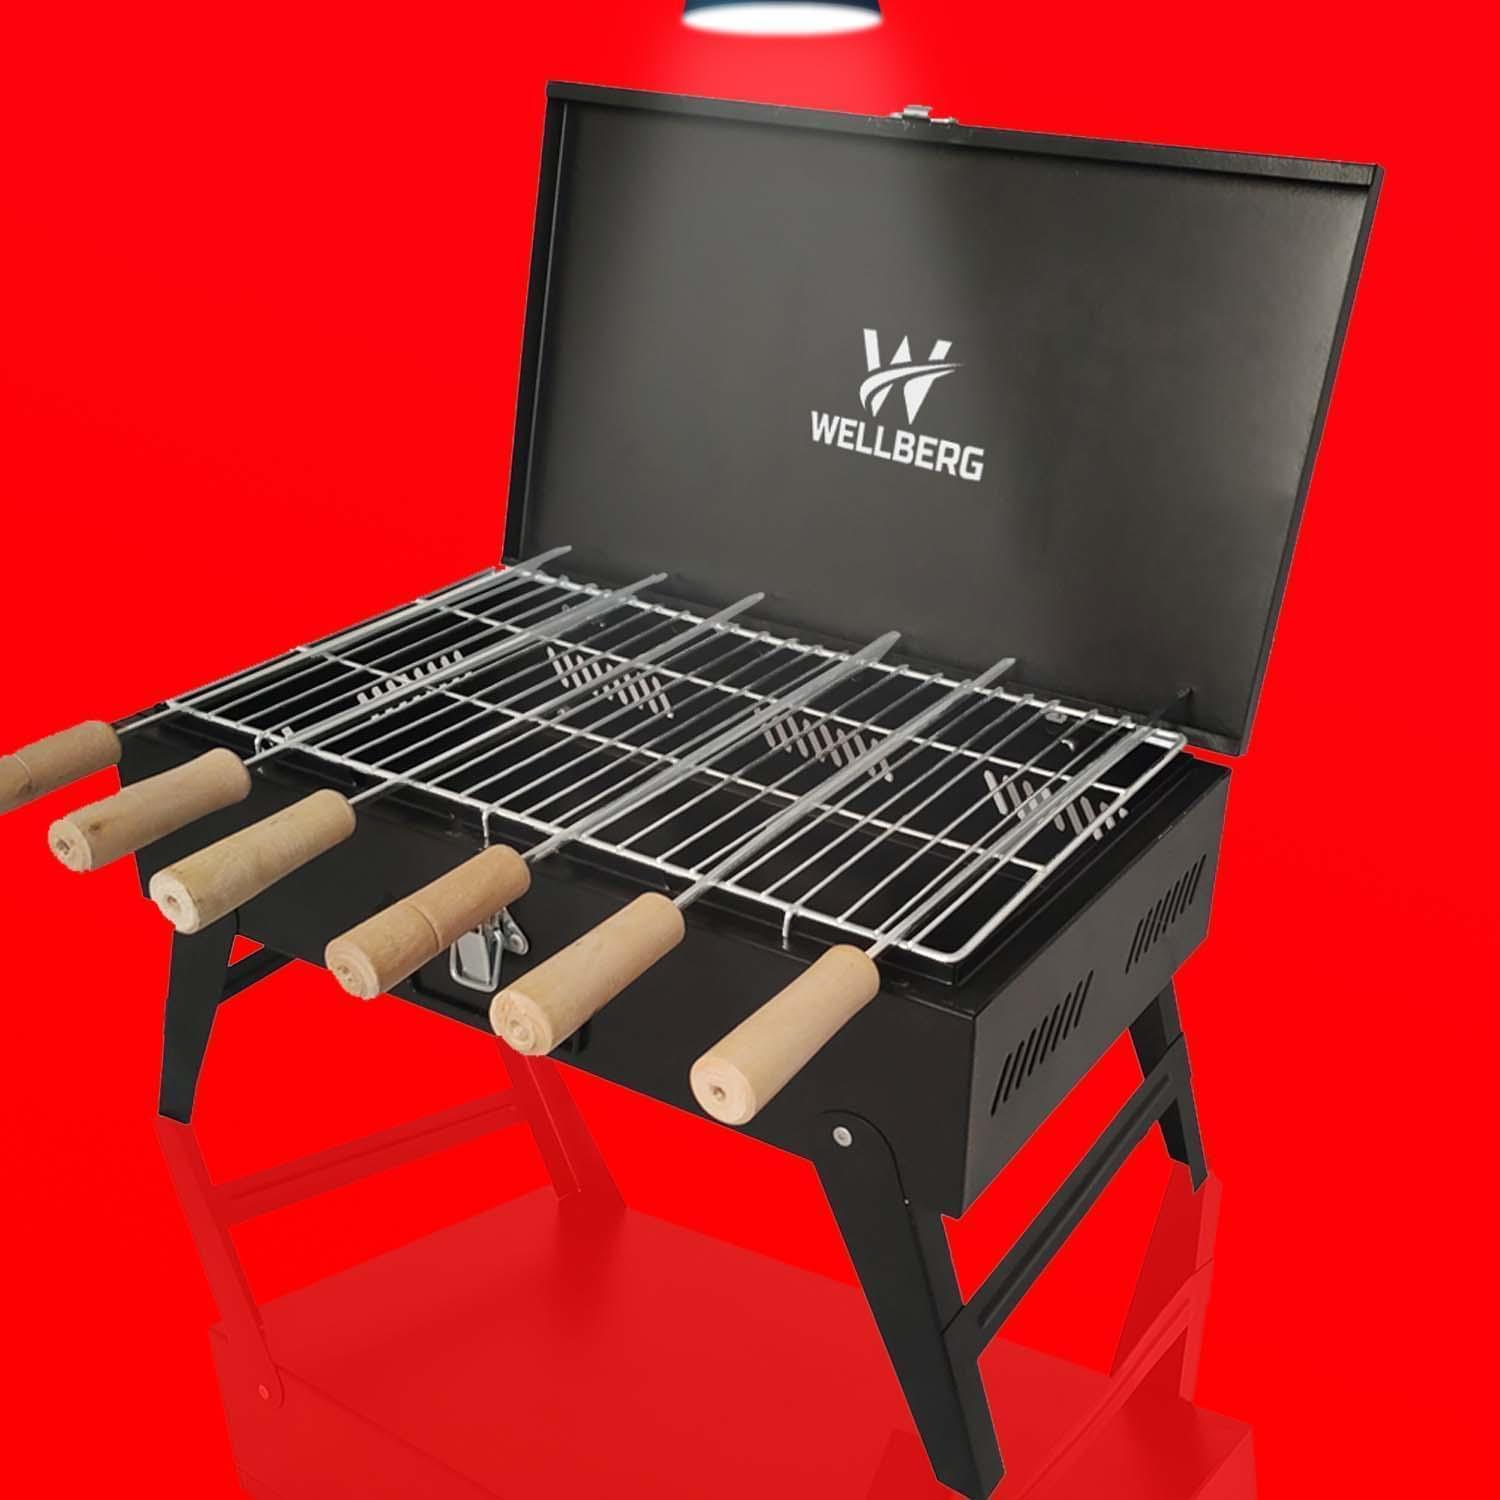 Wellberg Briefcase Charcoal Barbecue Grill with 8 skewers, 1 Grill, 1 Tong - WELLBERG